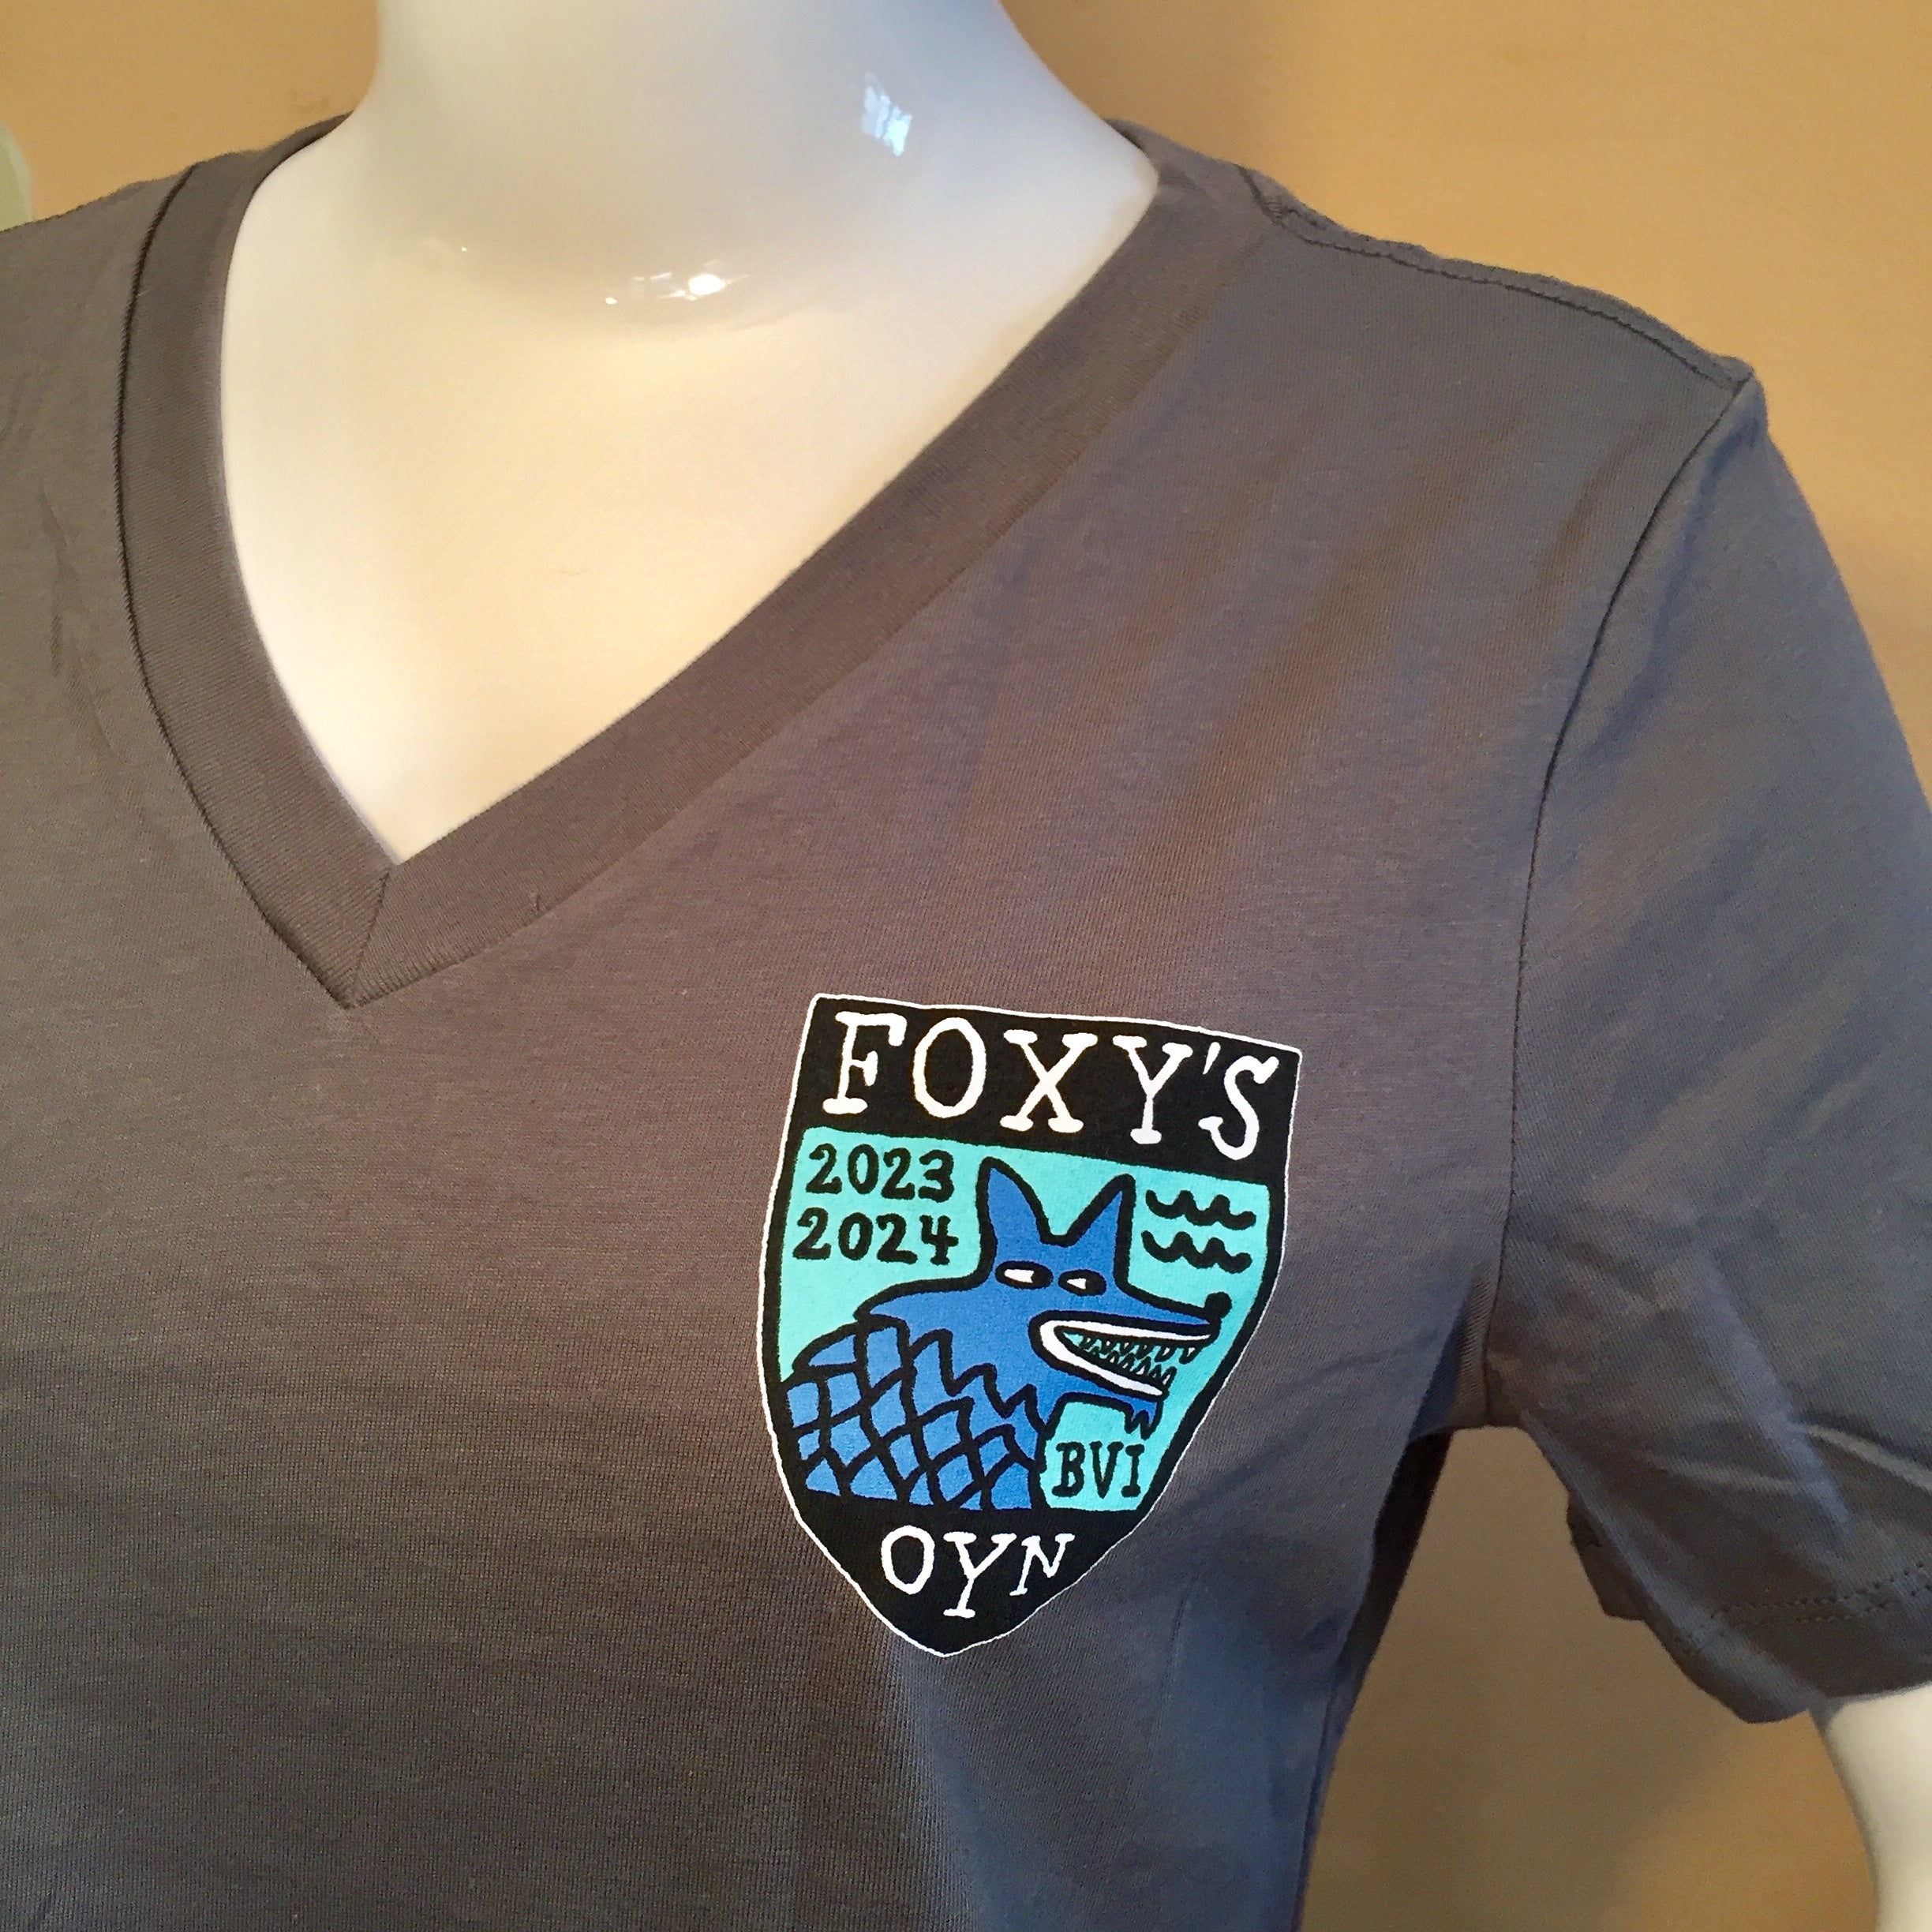 Foxy's Old Year's Night 23-24 'Game of Thrones' Ladies Short Sleeve V-neck Tee